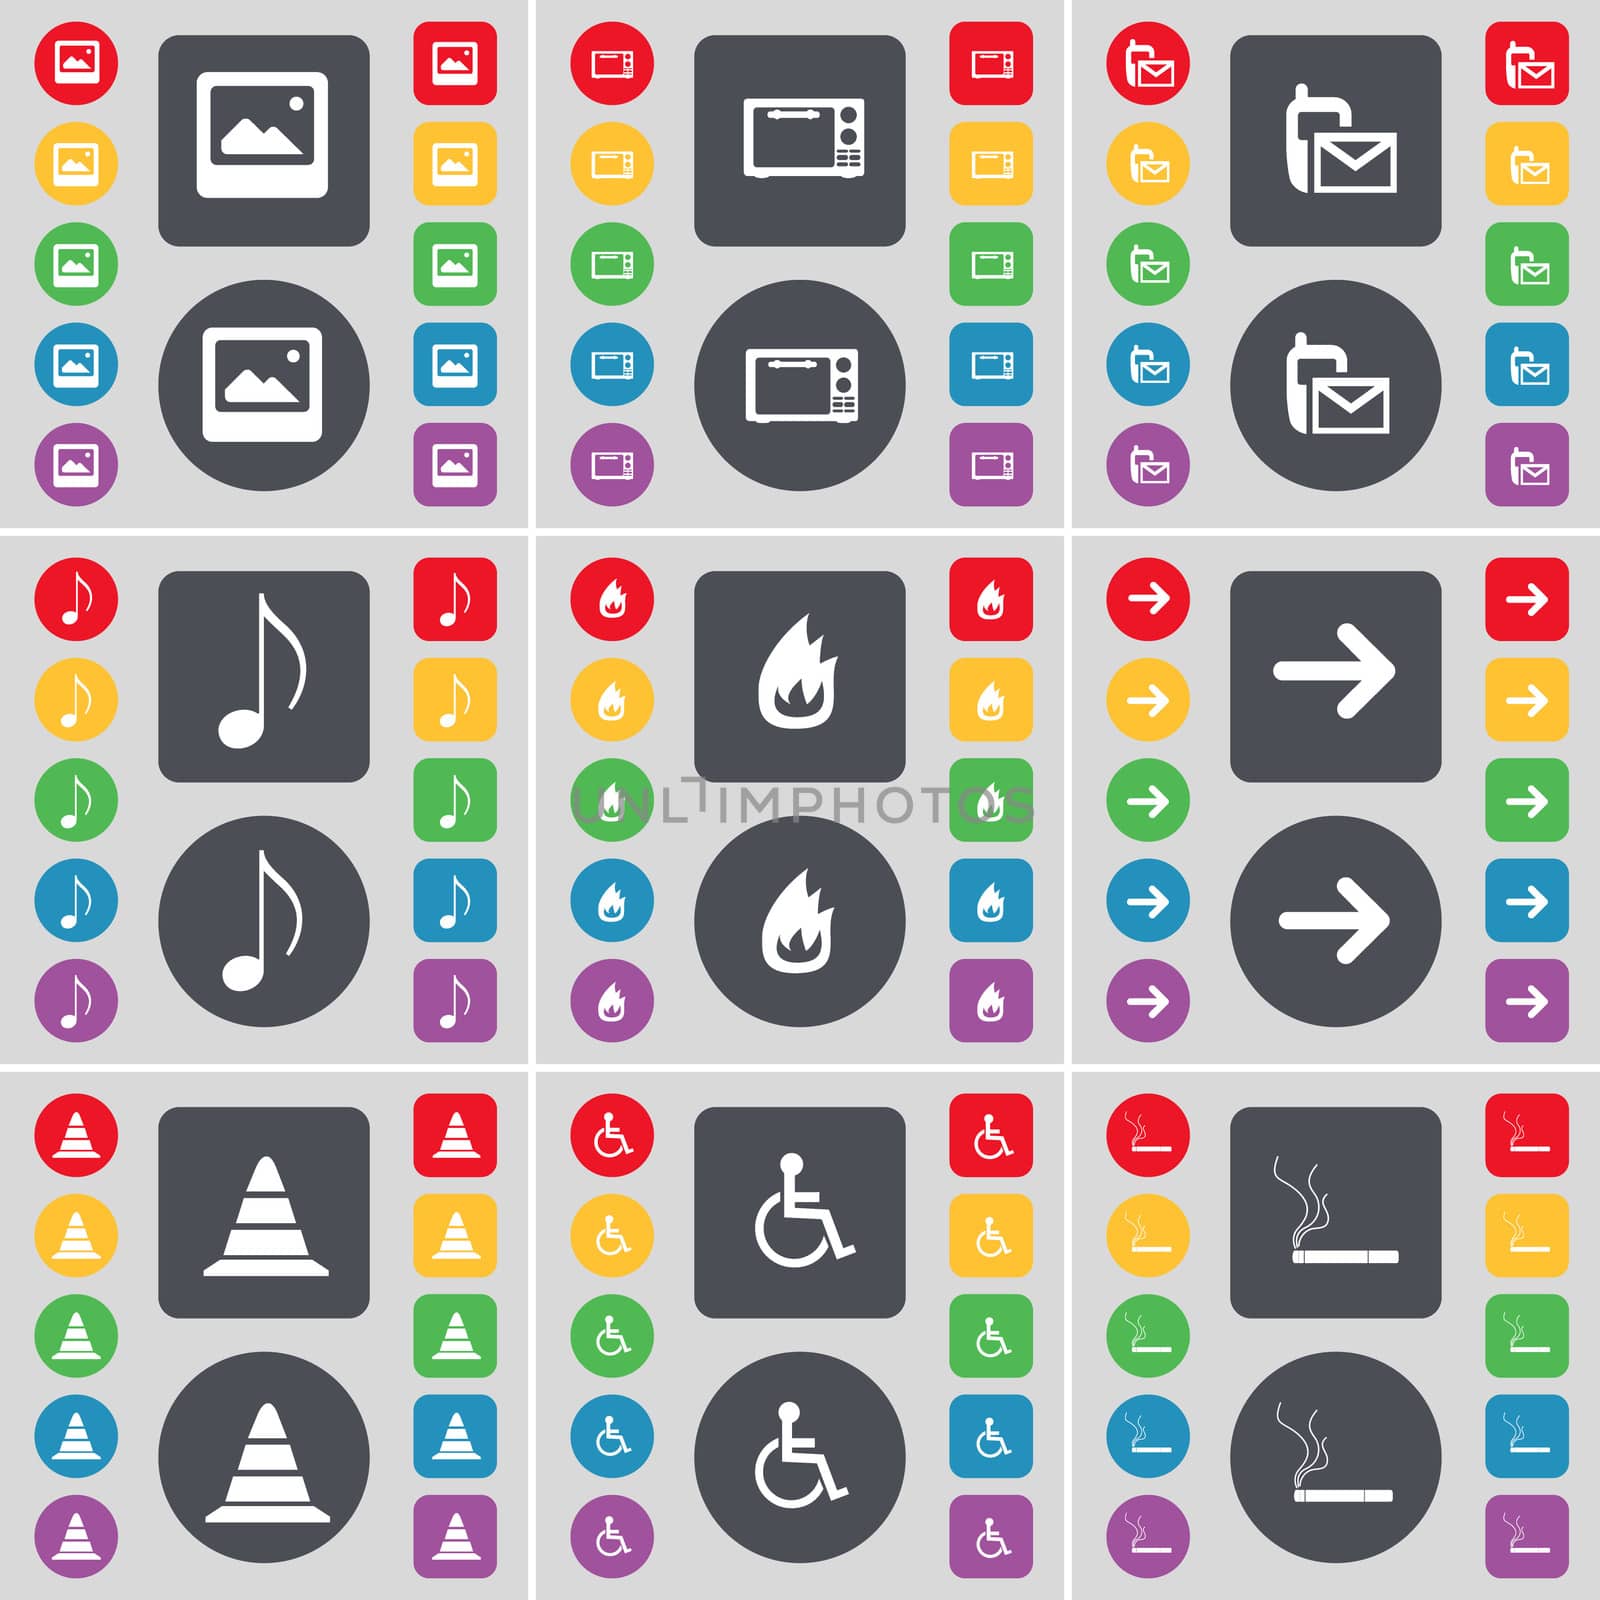 Window, Microwave, SMS, Note, Fire, Arrow right, Cone, Disabled person, Cigarette icon symbol. A large set of flat, colored buttons for your design. illustration